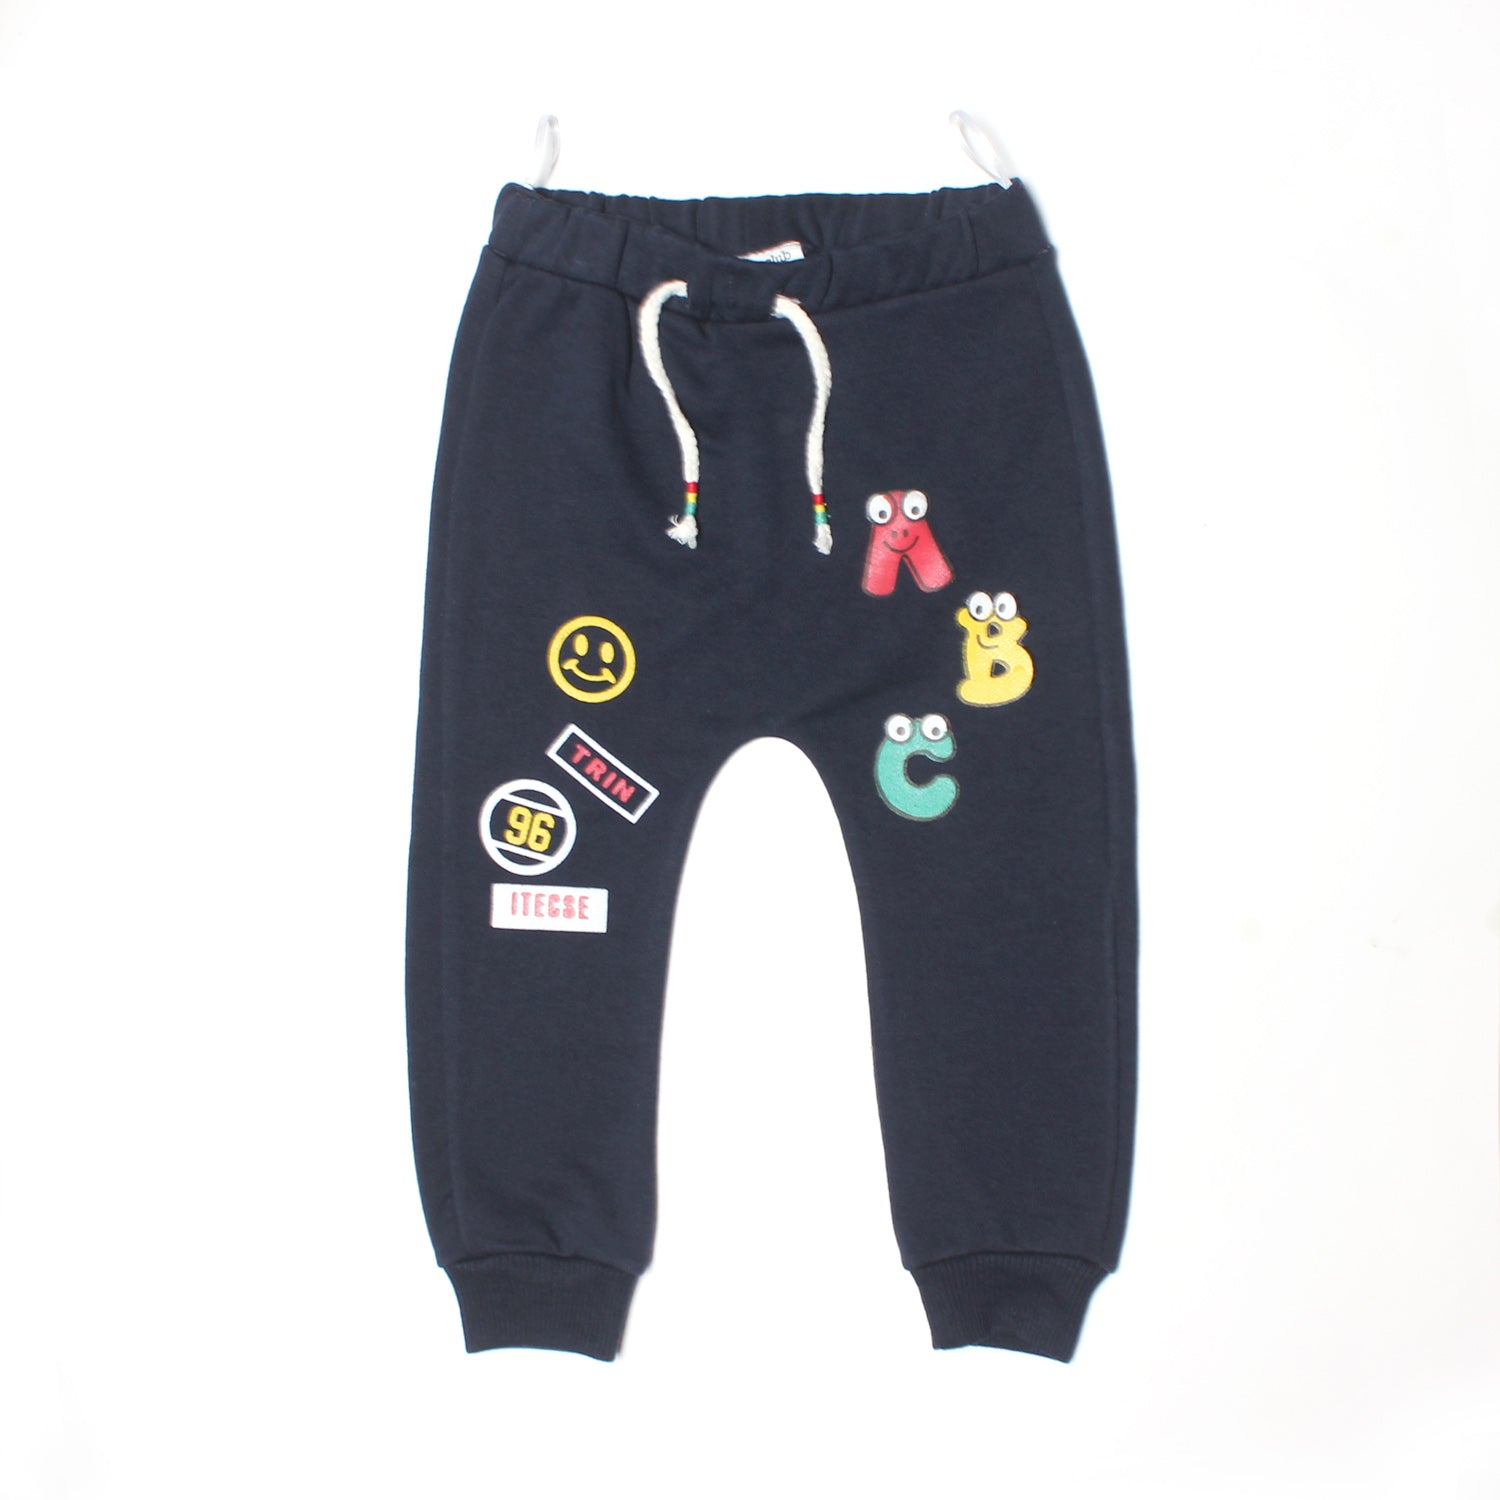 NEW NAVY BLUE ABC PRINTED JOGGER PANTS TROUSER